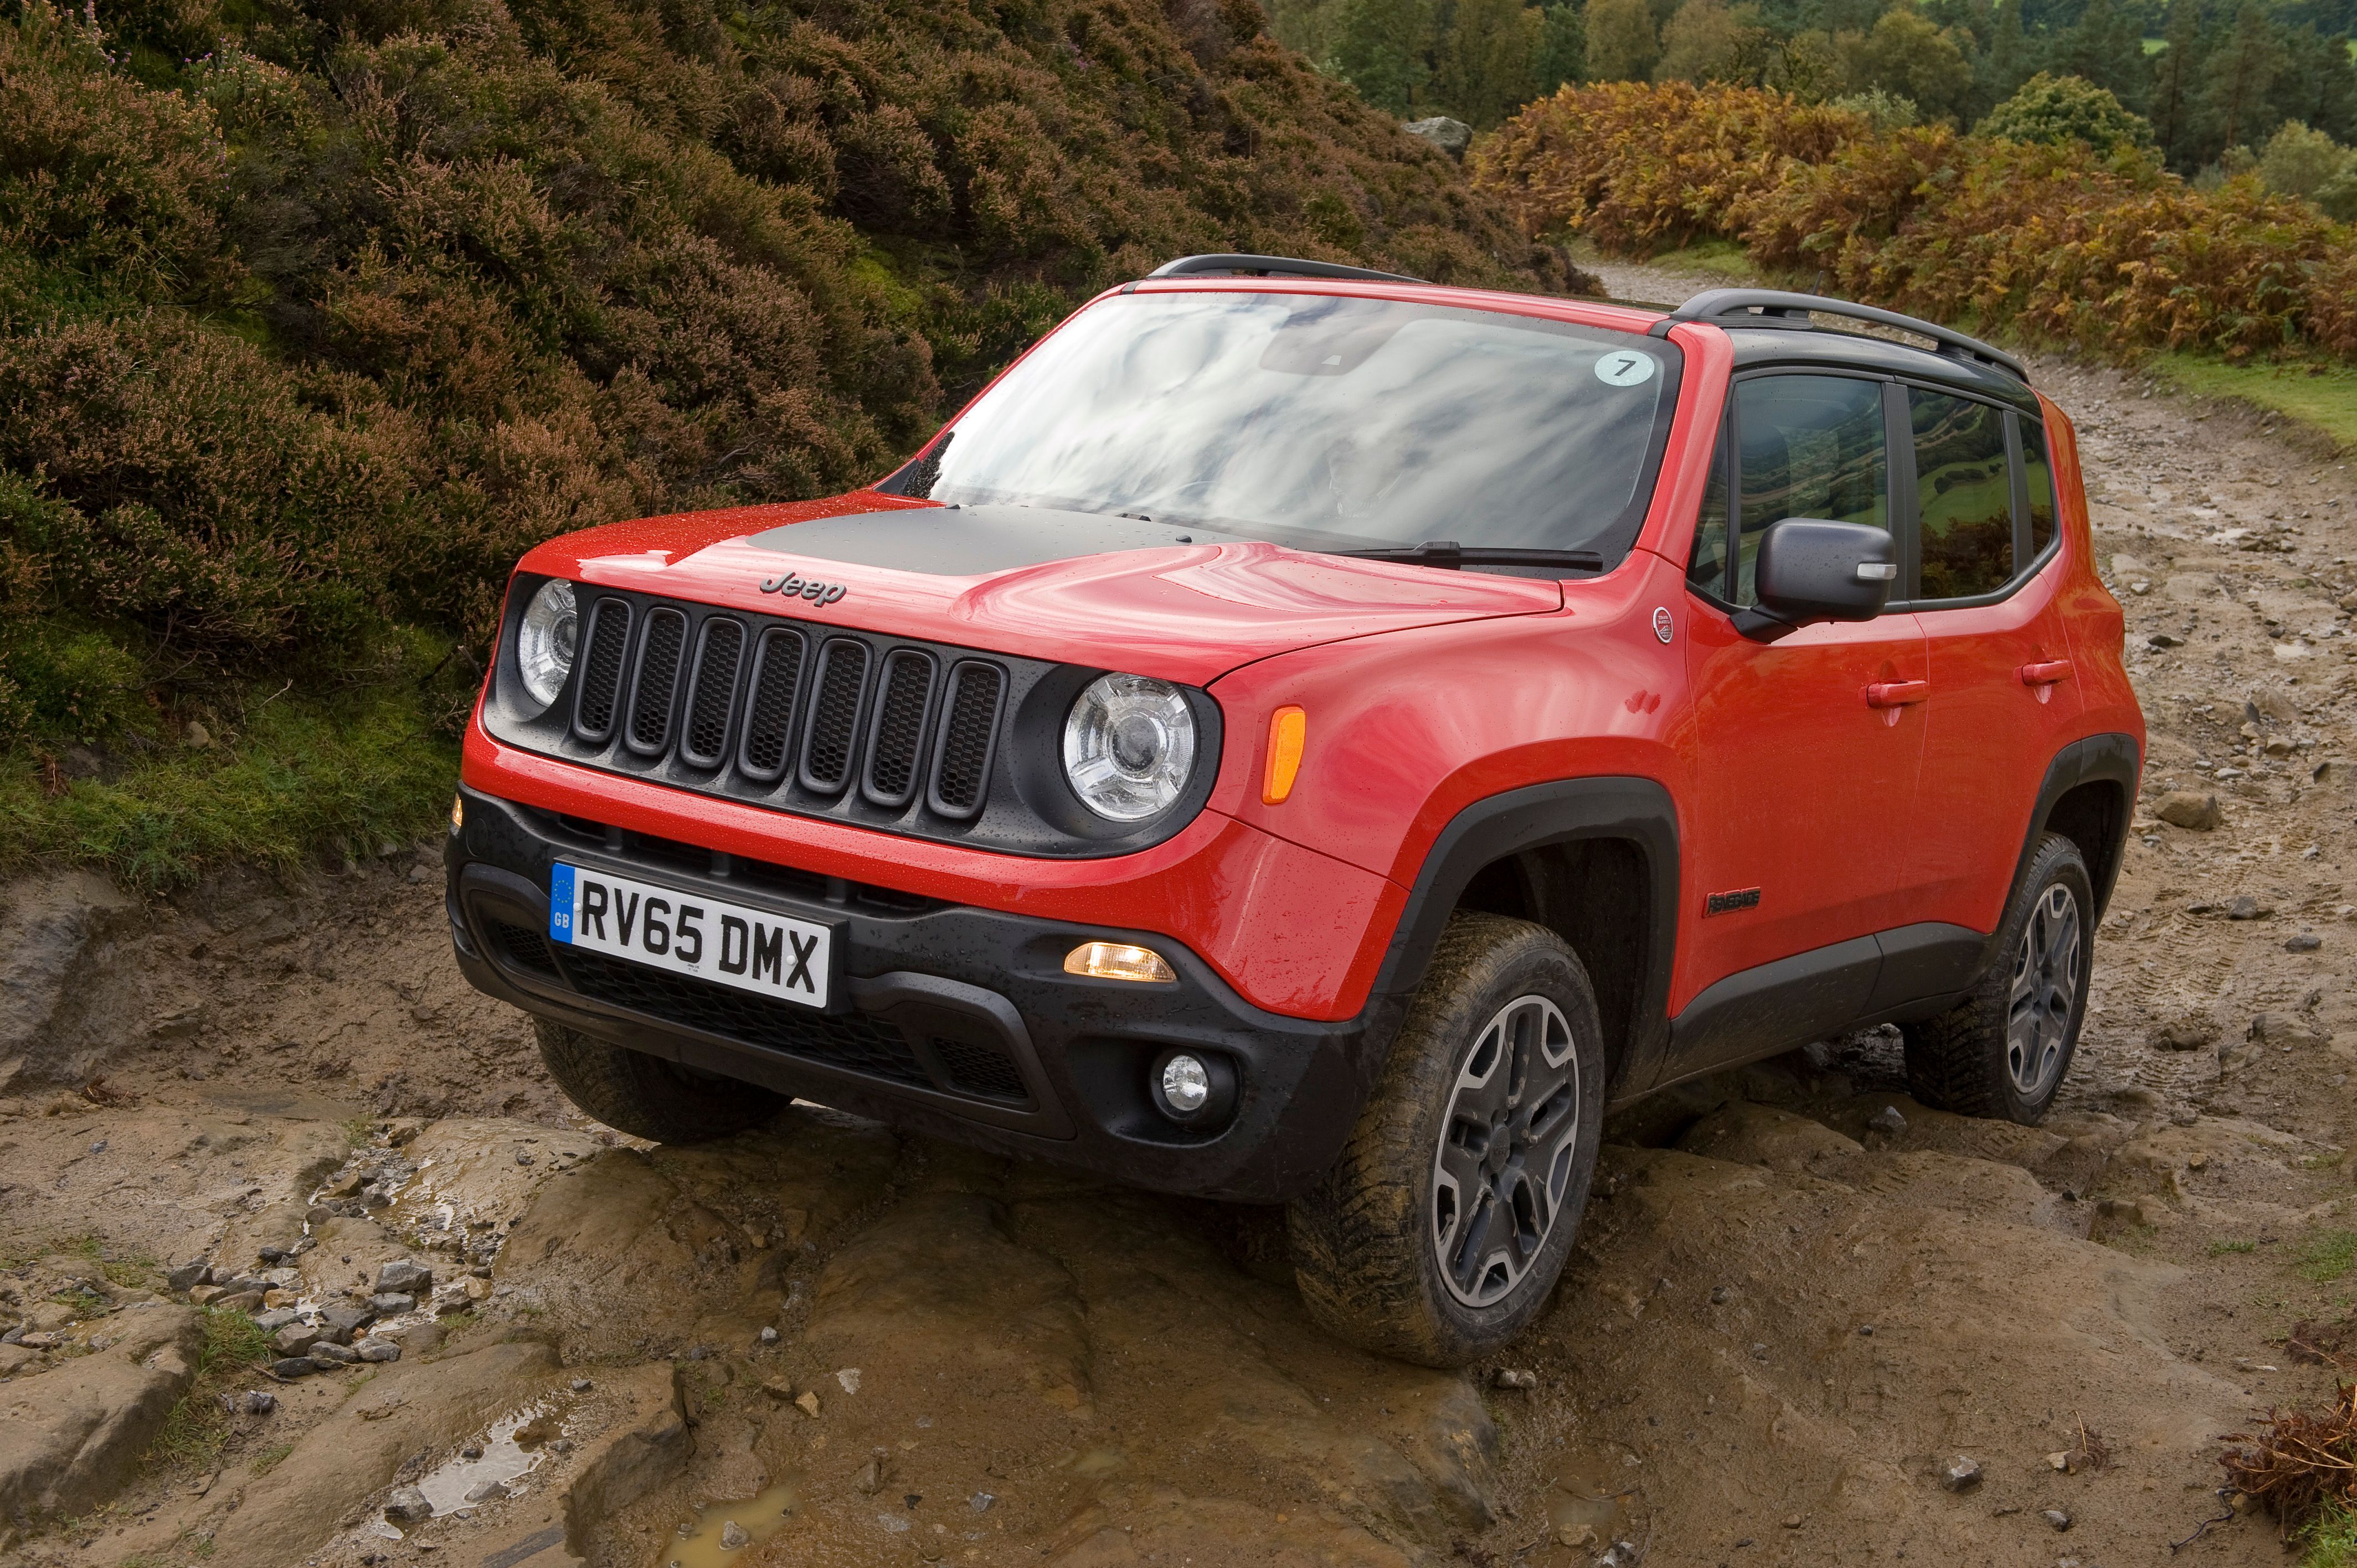 The 2017 Jeep Renegade goes uphill.